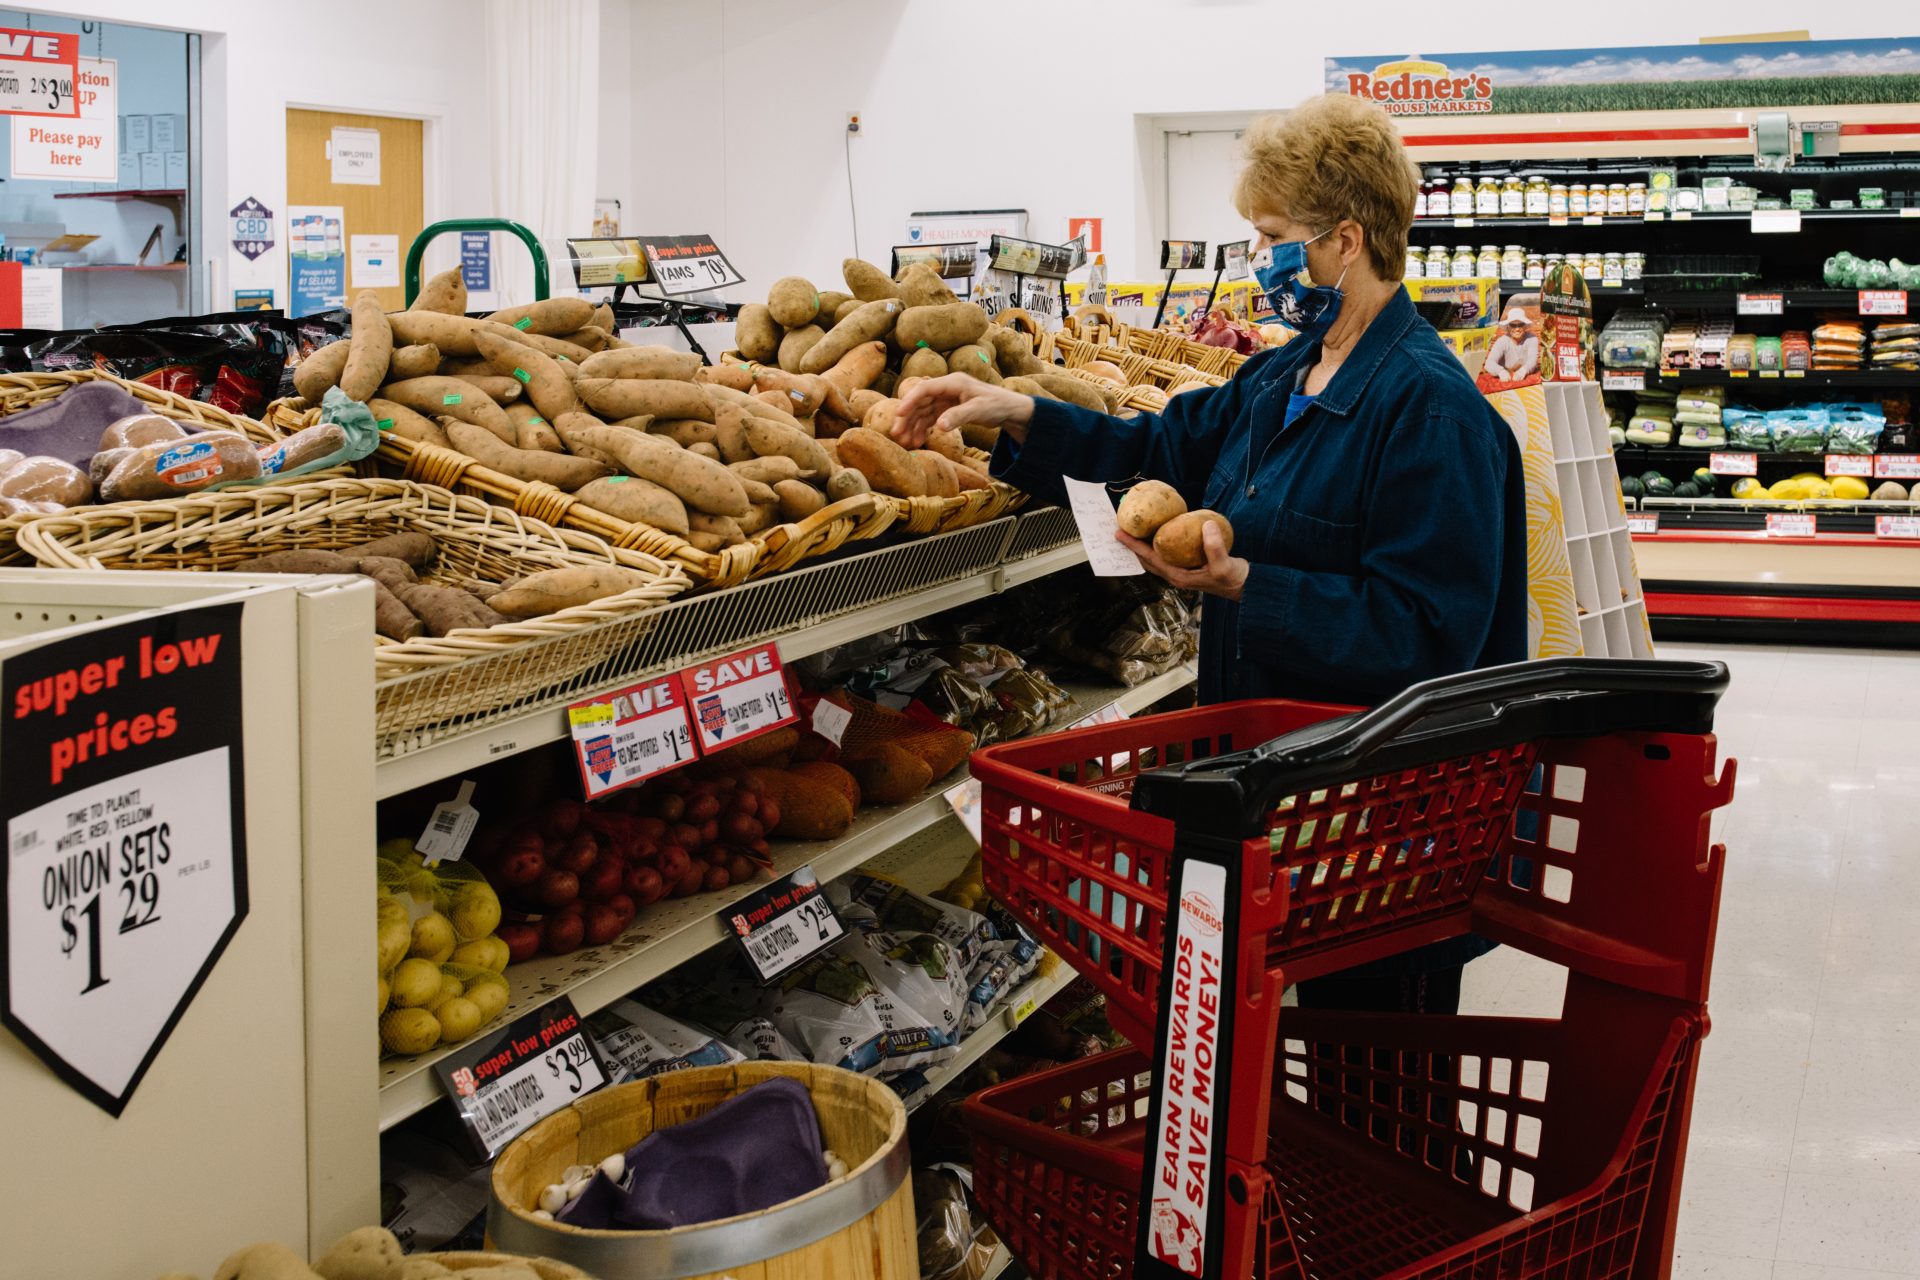 A shopper wearing a fabric mask picks out potatoes at the grocery store on April 10, 2020.